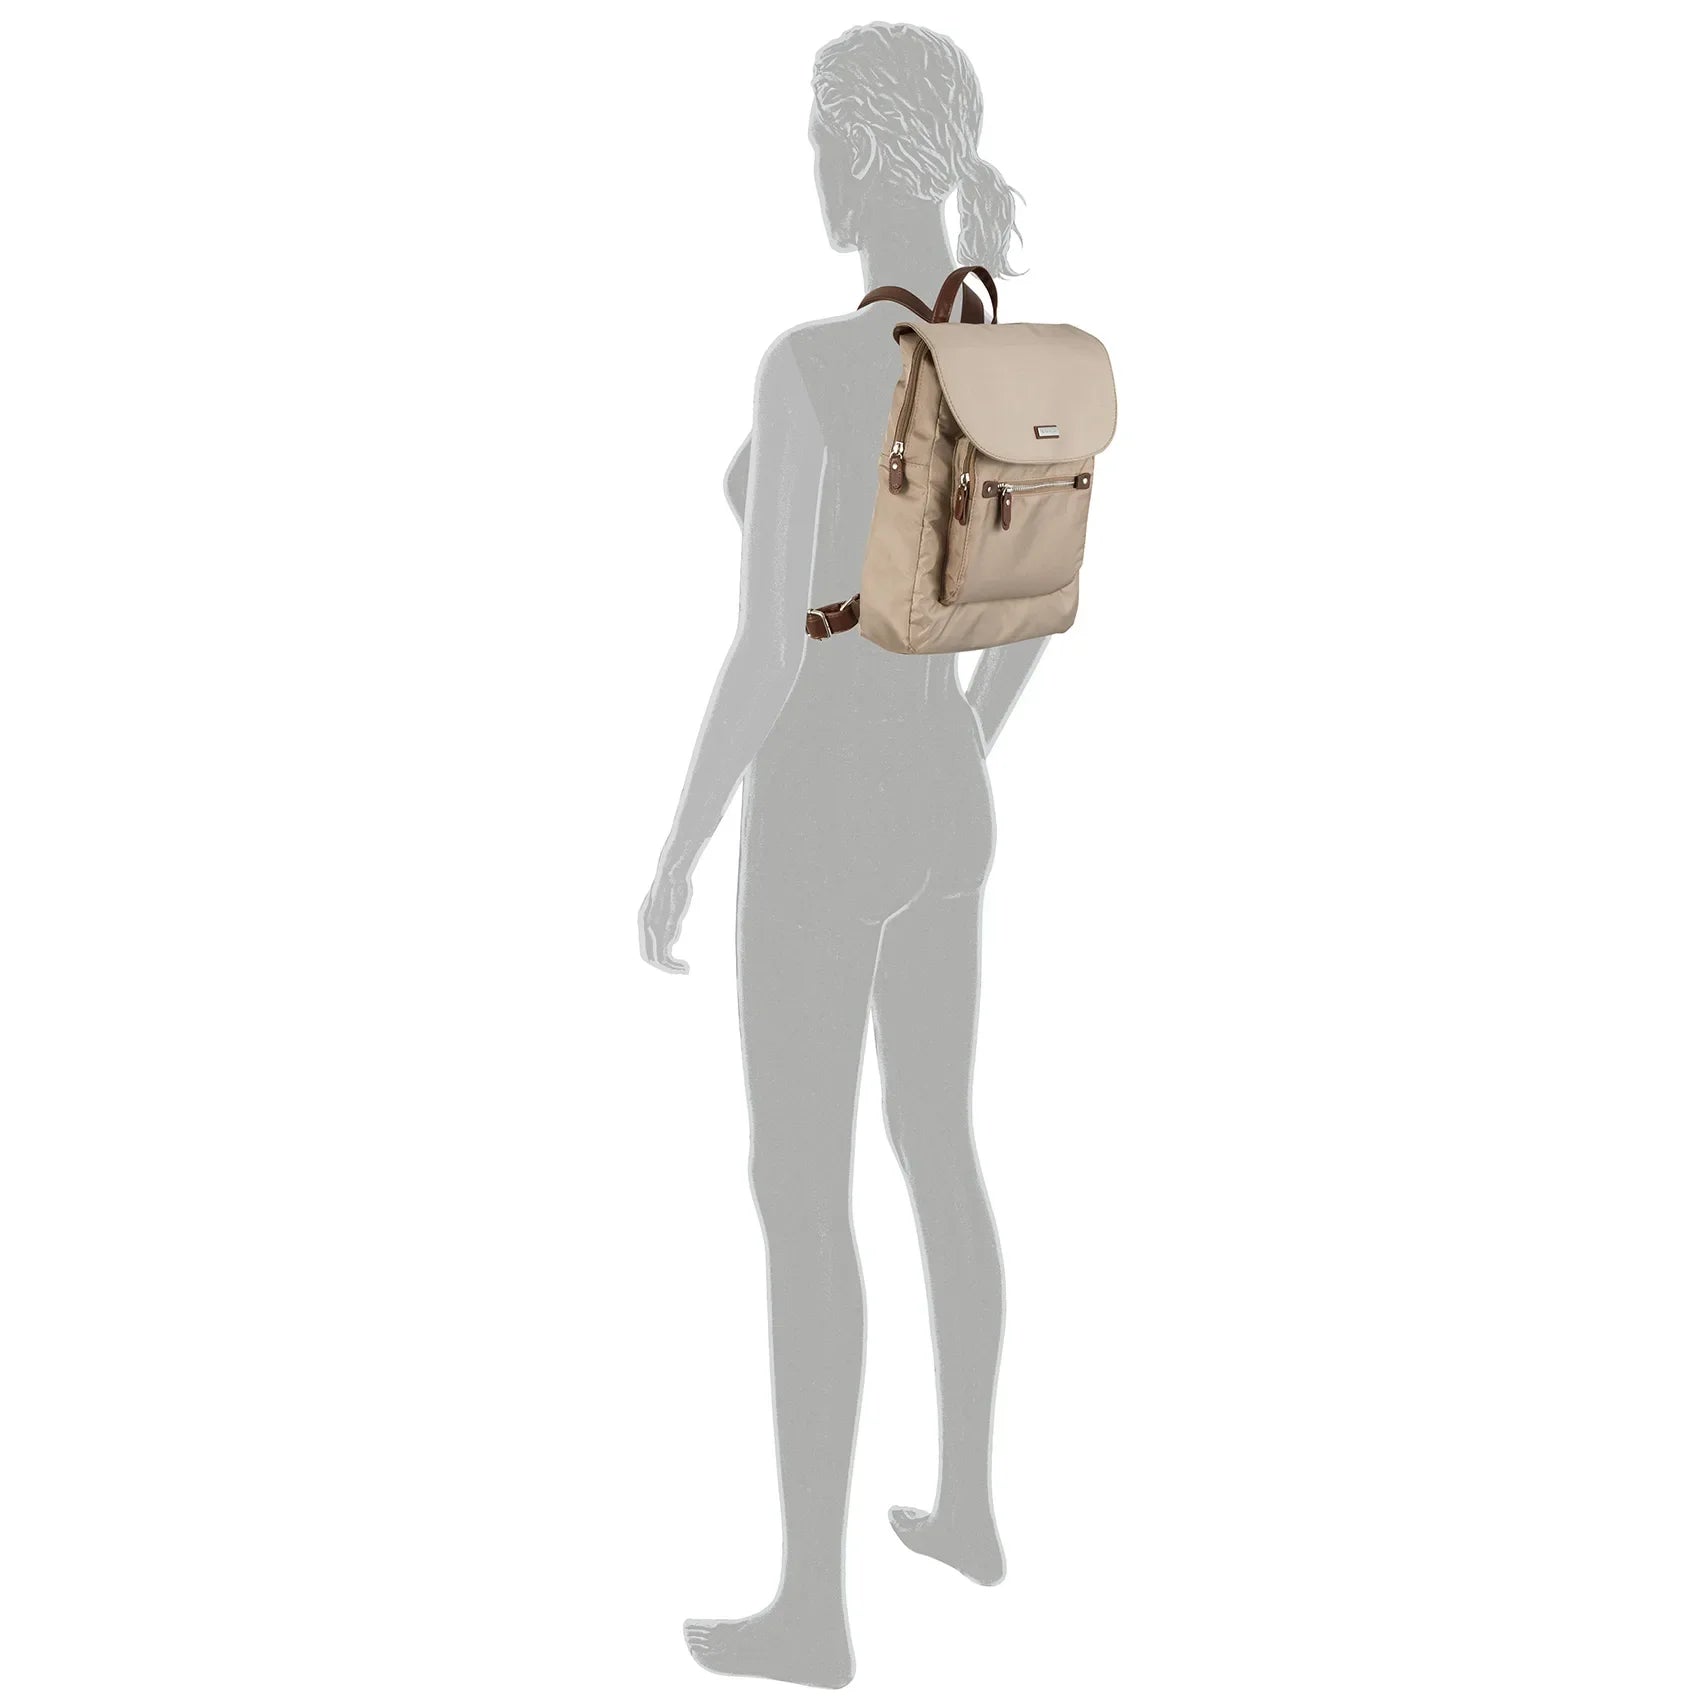 Tom Tailor Bags Rina Backpack 31 cm - taupe